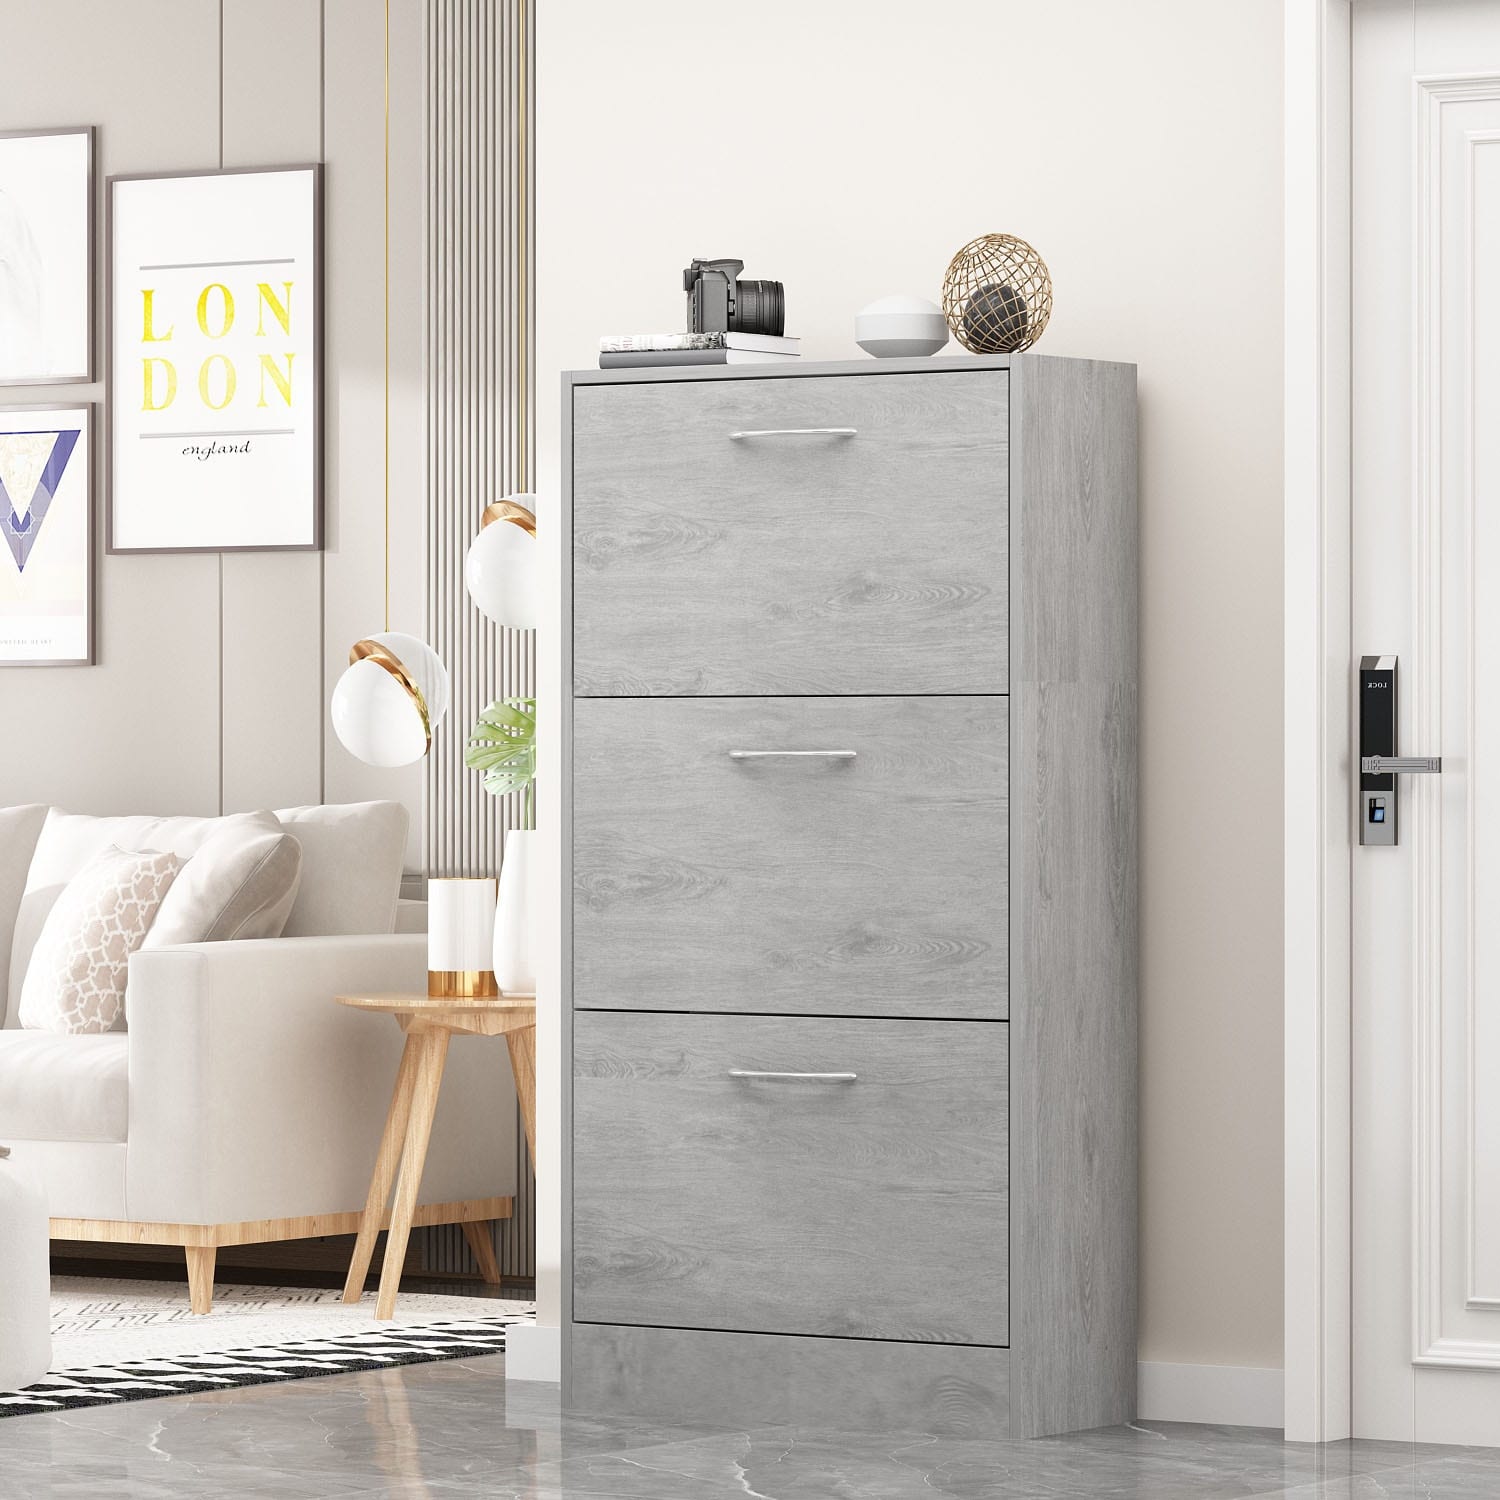 https://ak1.ostkcdn.com/images/products/is/images/direct/077e01bdd6d210b967fc383367d84cc04186200c/Modern-Shoe-Storage-Cabinet-for-Entryway%2C-2-Tier-Floor-Shoes-Cabinet.jpg